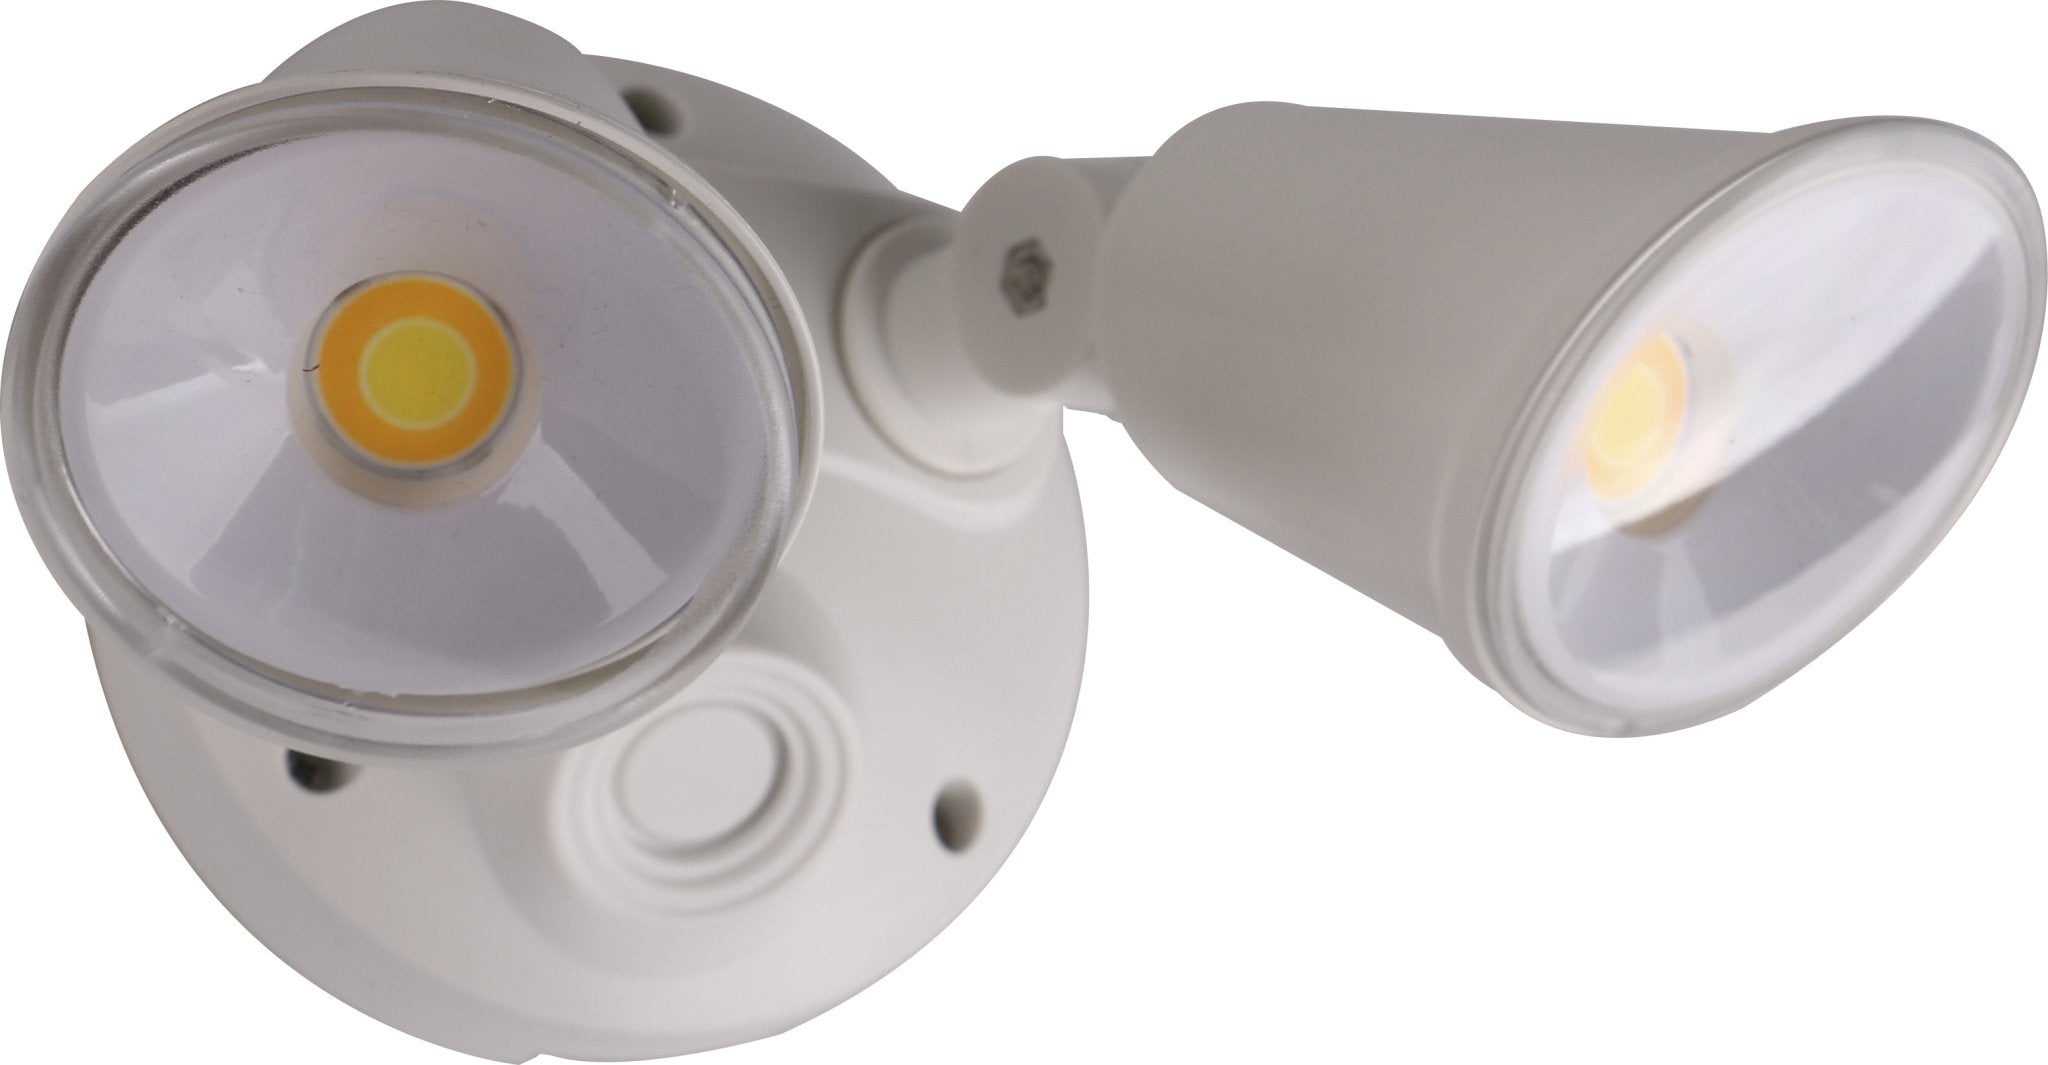 Defender Exterior LED Security Light Twin 20w Tri Colour in White - Mases LightingMartec